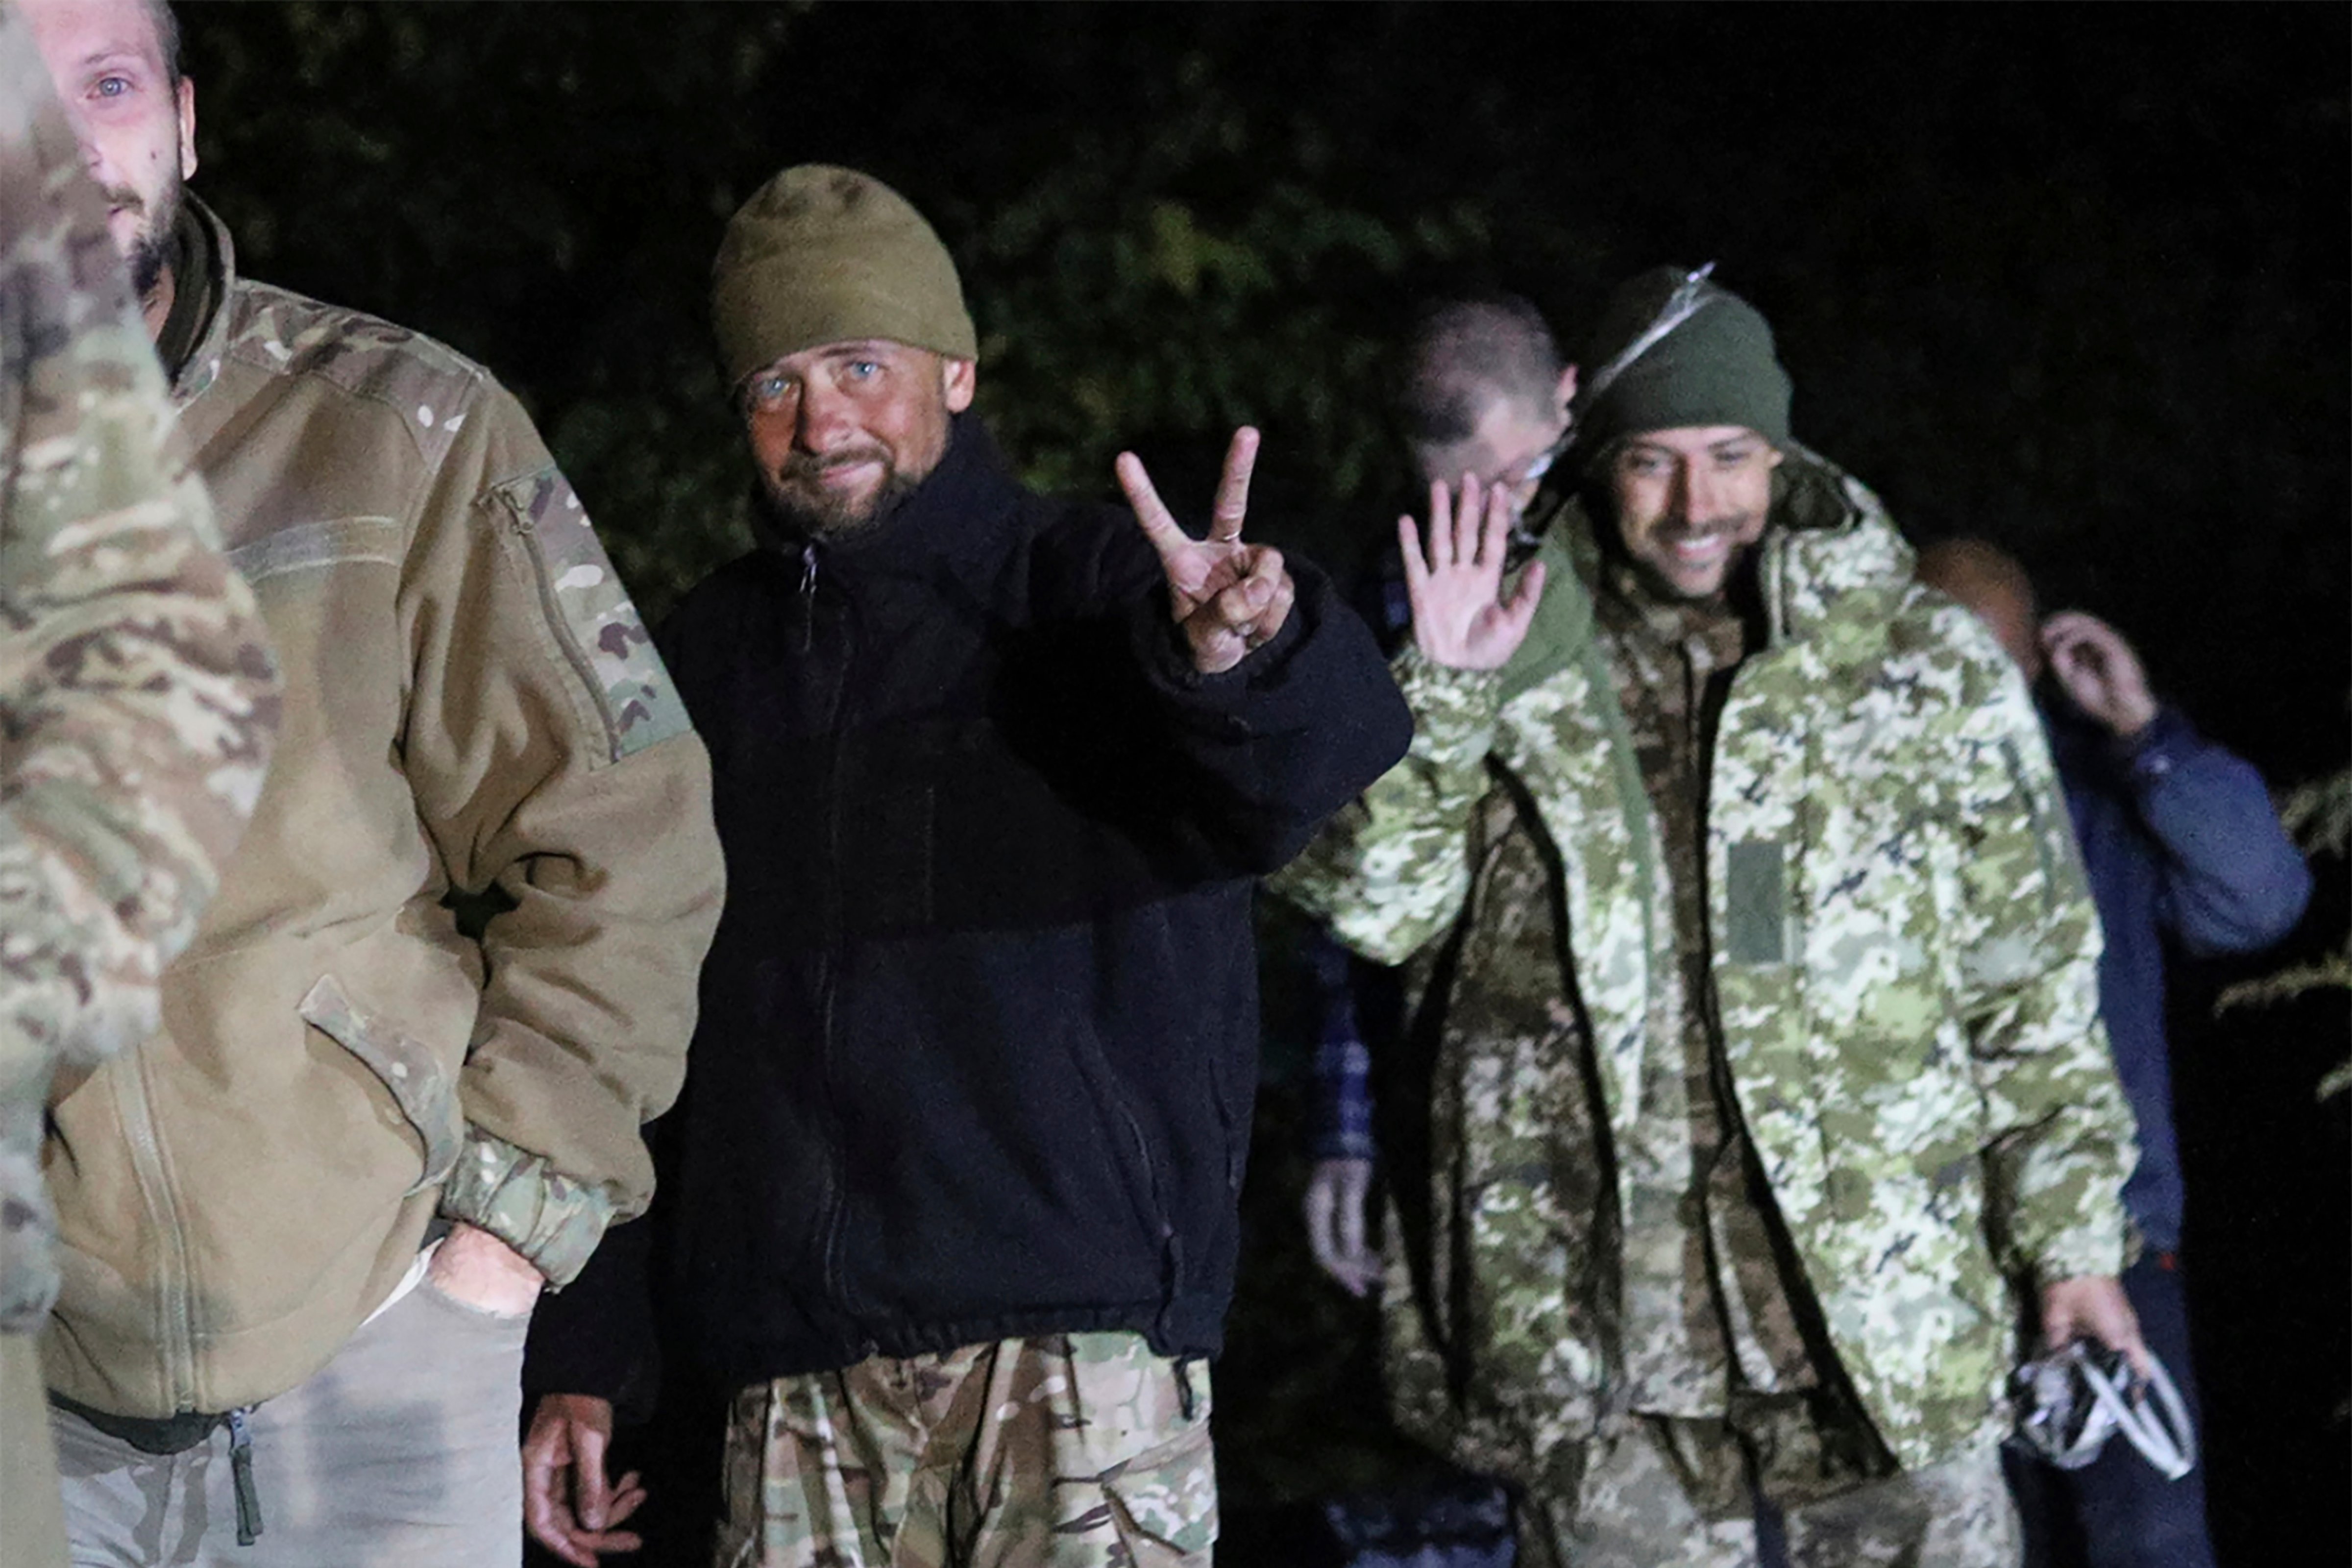 Ukrainian soldiers, who were released in a prisoner exchange between Russia and Ukraine, smile close to Chernihiv, Ukraine, late Wednesday, Sept. 21, 2022. Ukraine announced a high-profile prisoner swap early Thursday that culminated months of efforts to free many of the Ukrainian fighters who defended a steel plant in Mariupol during a long Russian siege. (Ukrainian Security Service Press Office/AP)